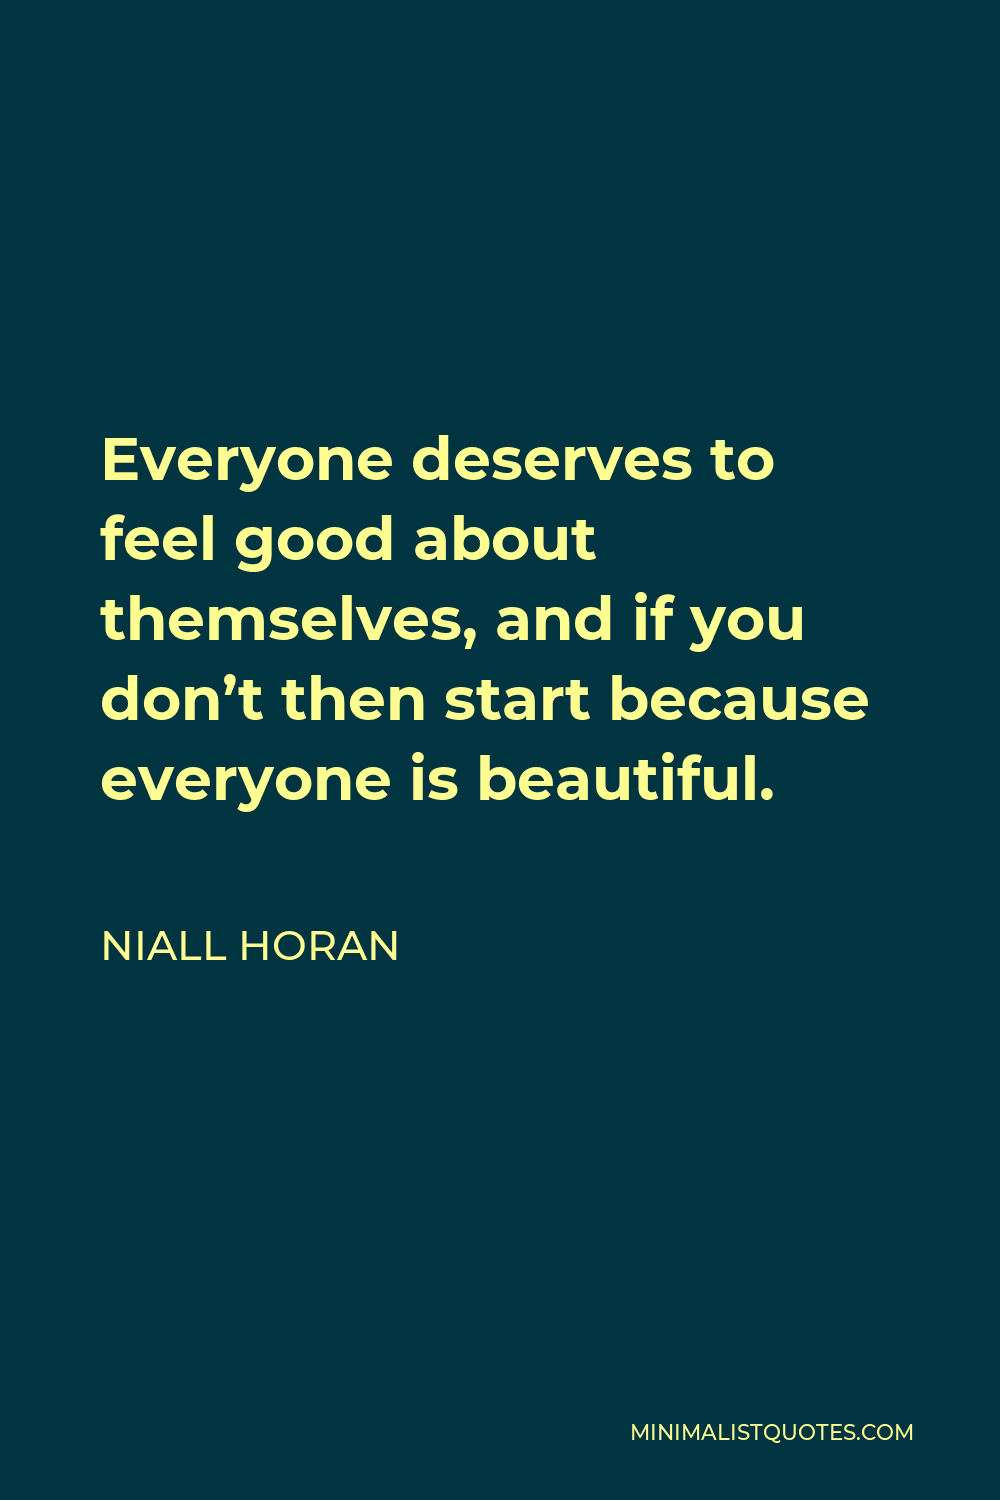 Niall Horan Quote - Everyone deserves to feel good about themselves, and if you don’t then start because everyone is beautiful.